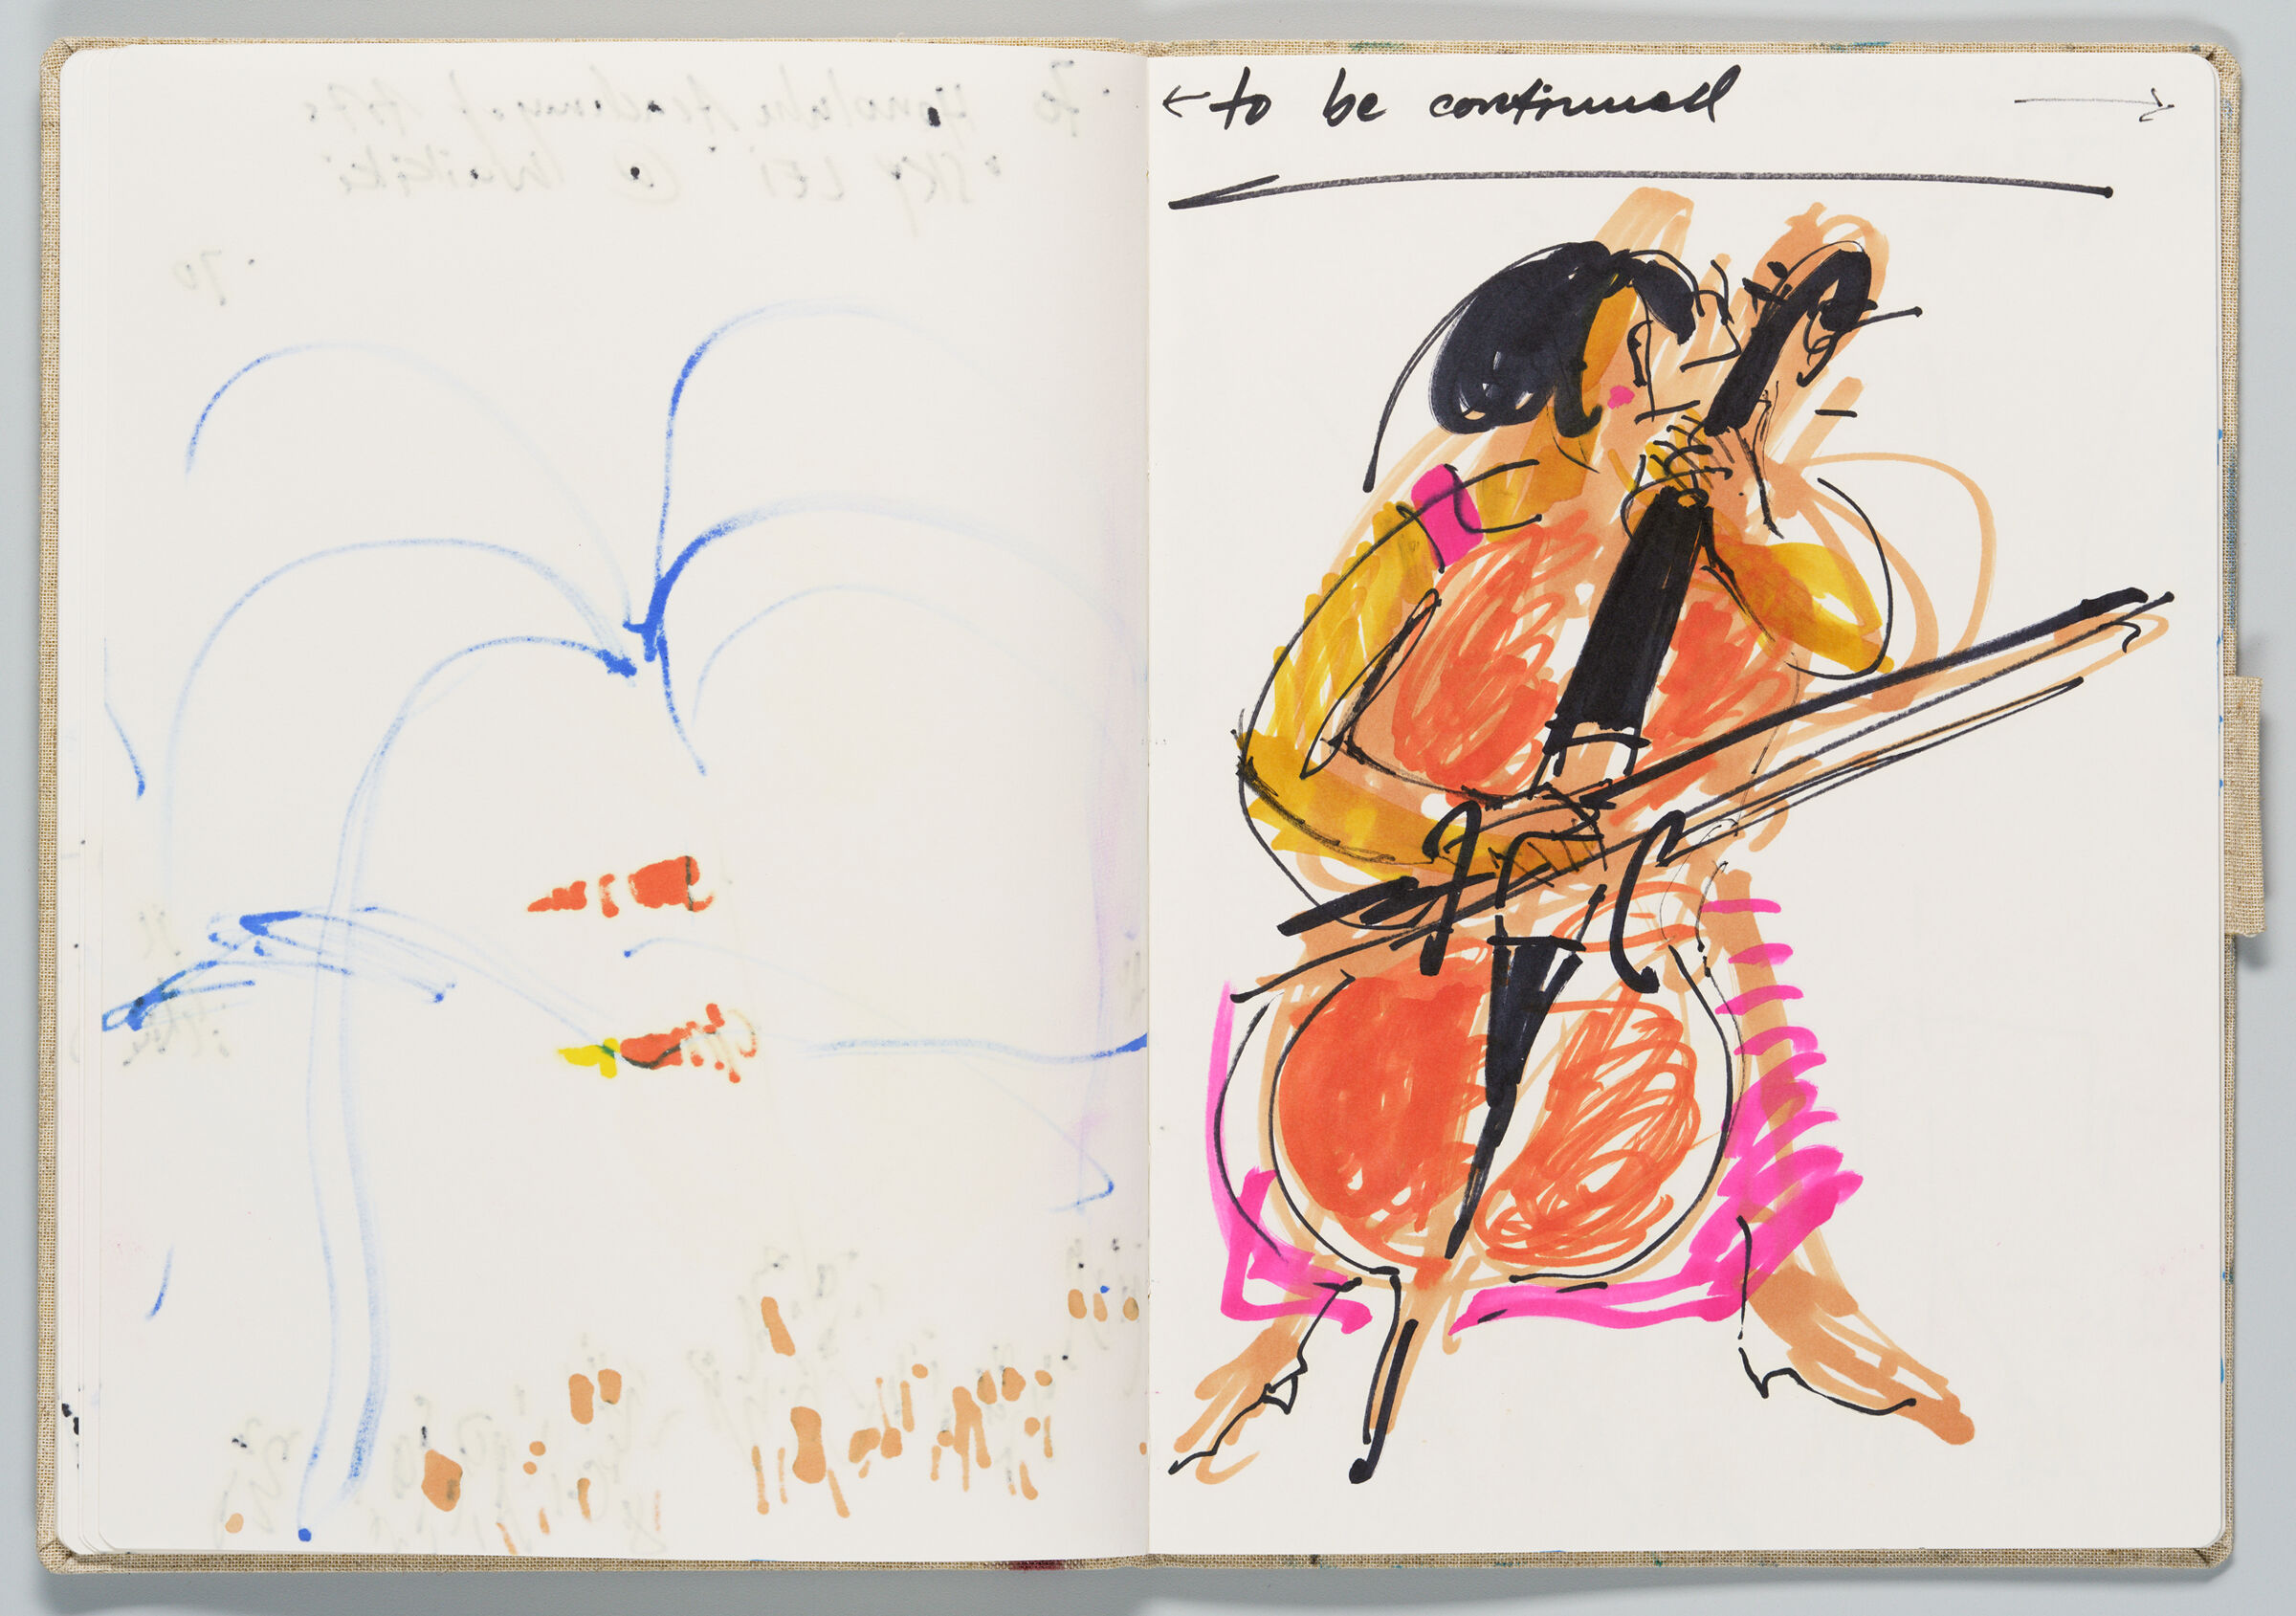 Untitled (Bleed-Through Of Previous Page, Left Page); Untitled (Sketch Of Sky Event, Charlotte Moorman With Cello, Right Page)